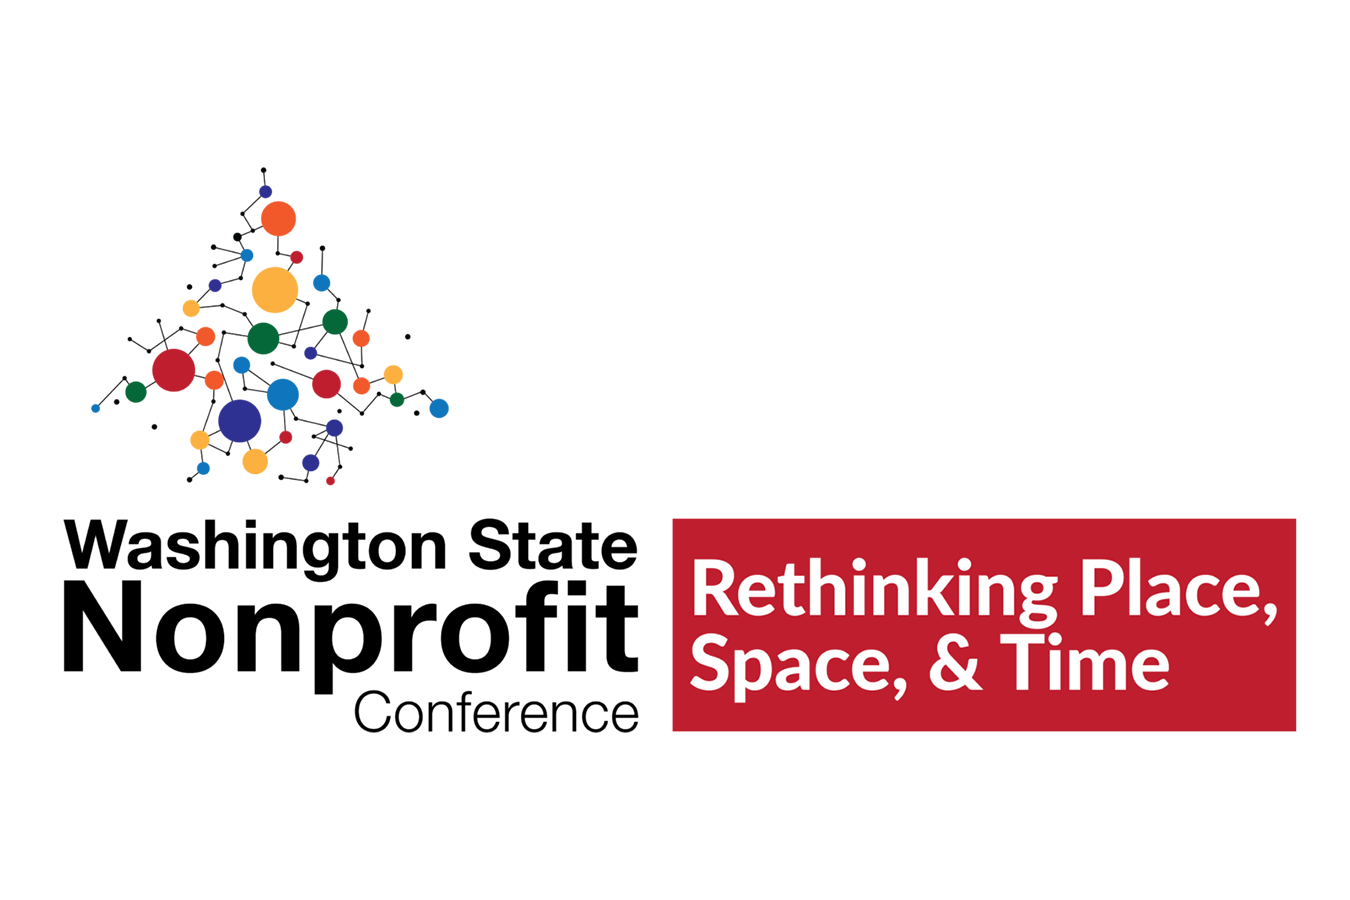 WA ST Nonprofit Conference Banner - Rethinking Place, Space and Time. Picture of an arrow made of colorful dots and connecting lines